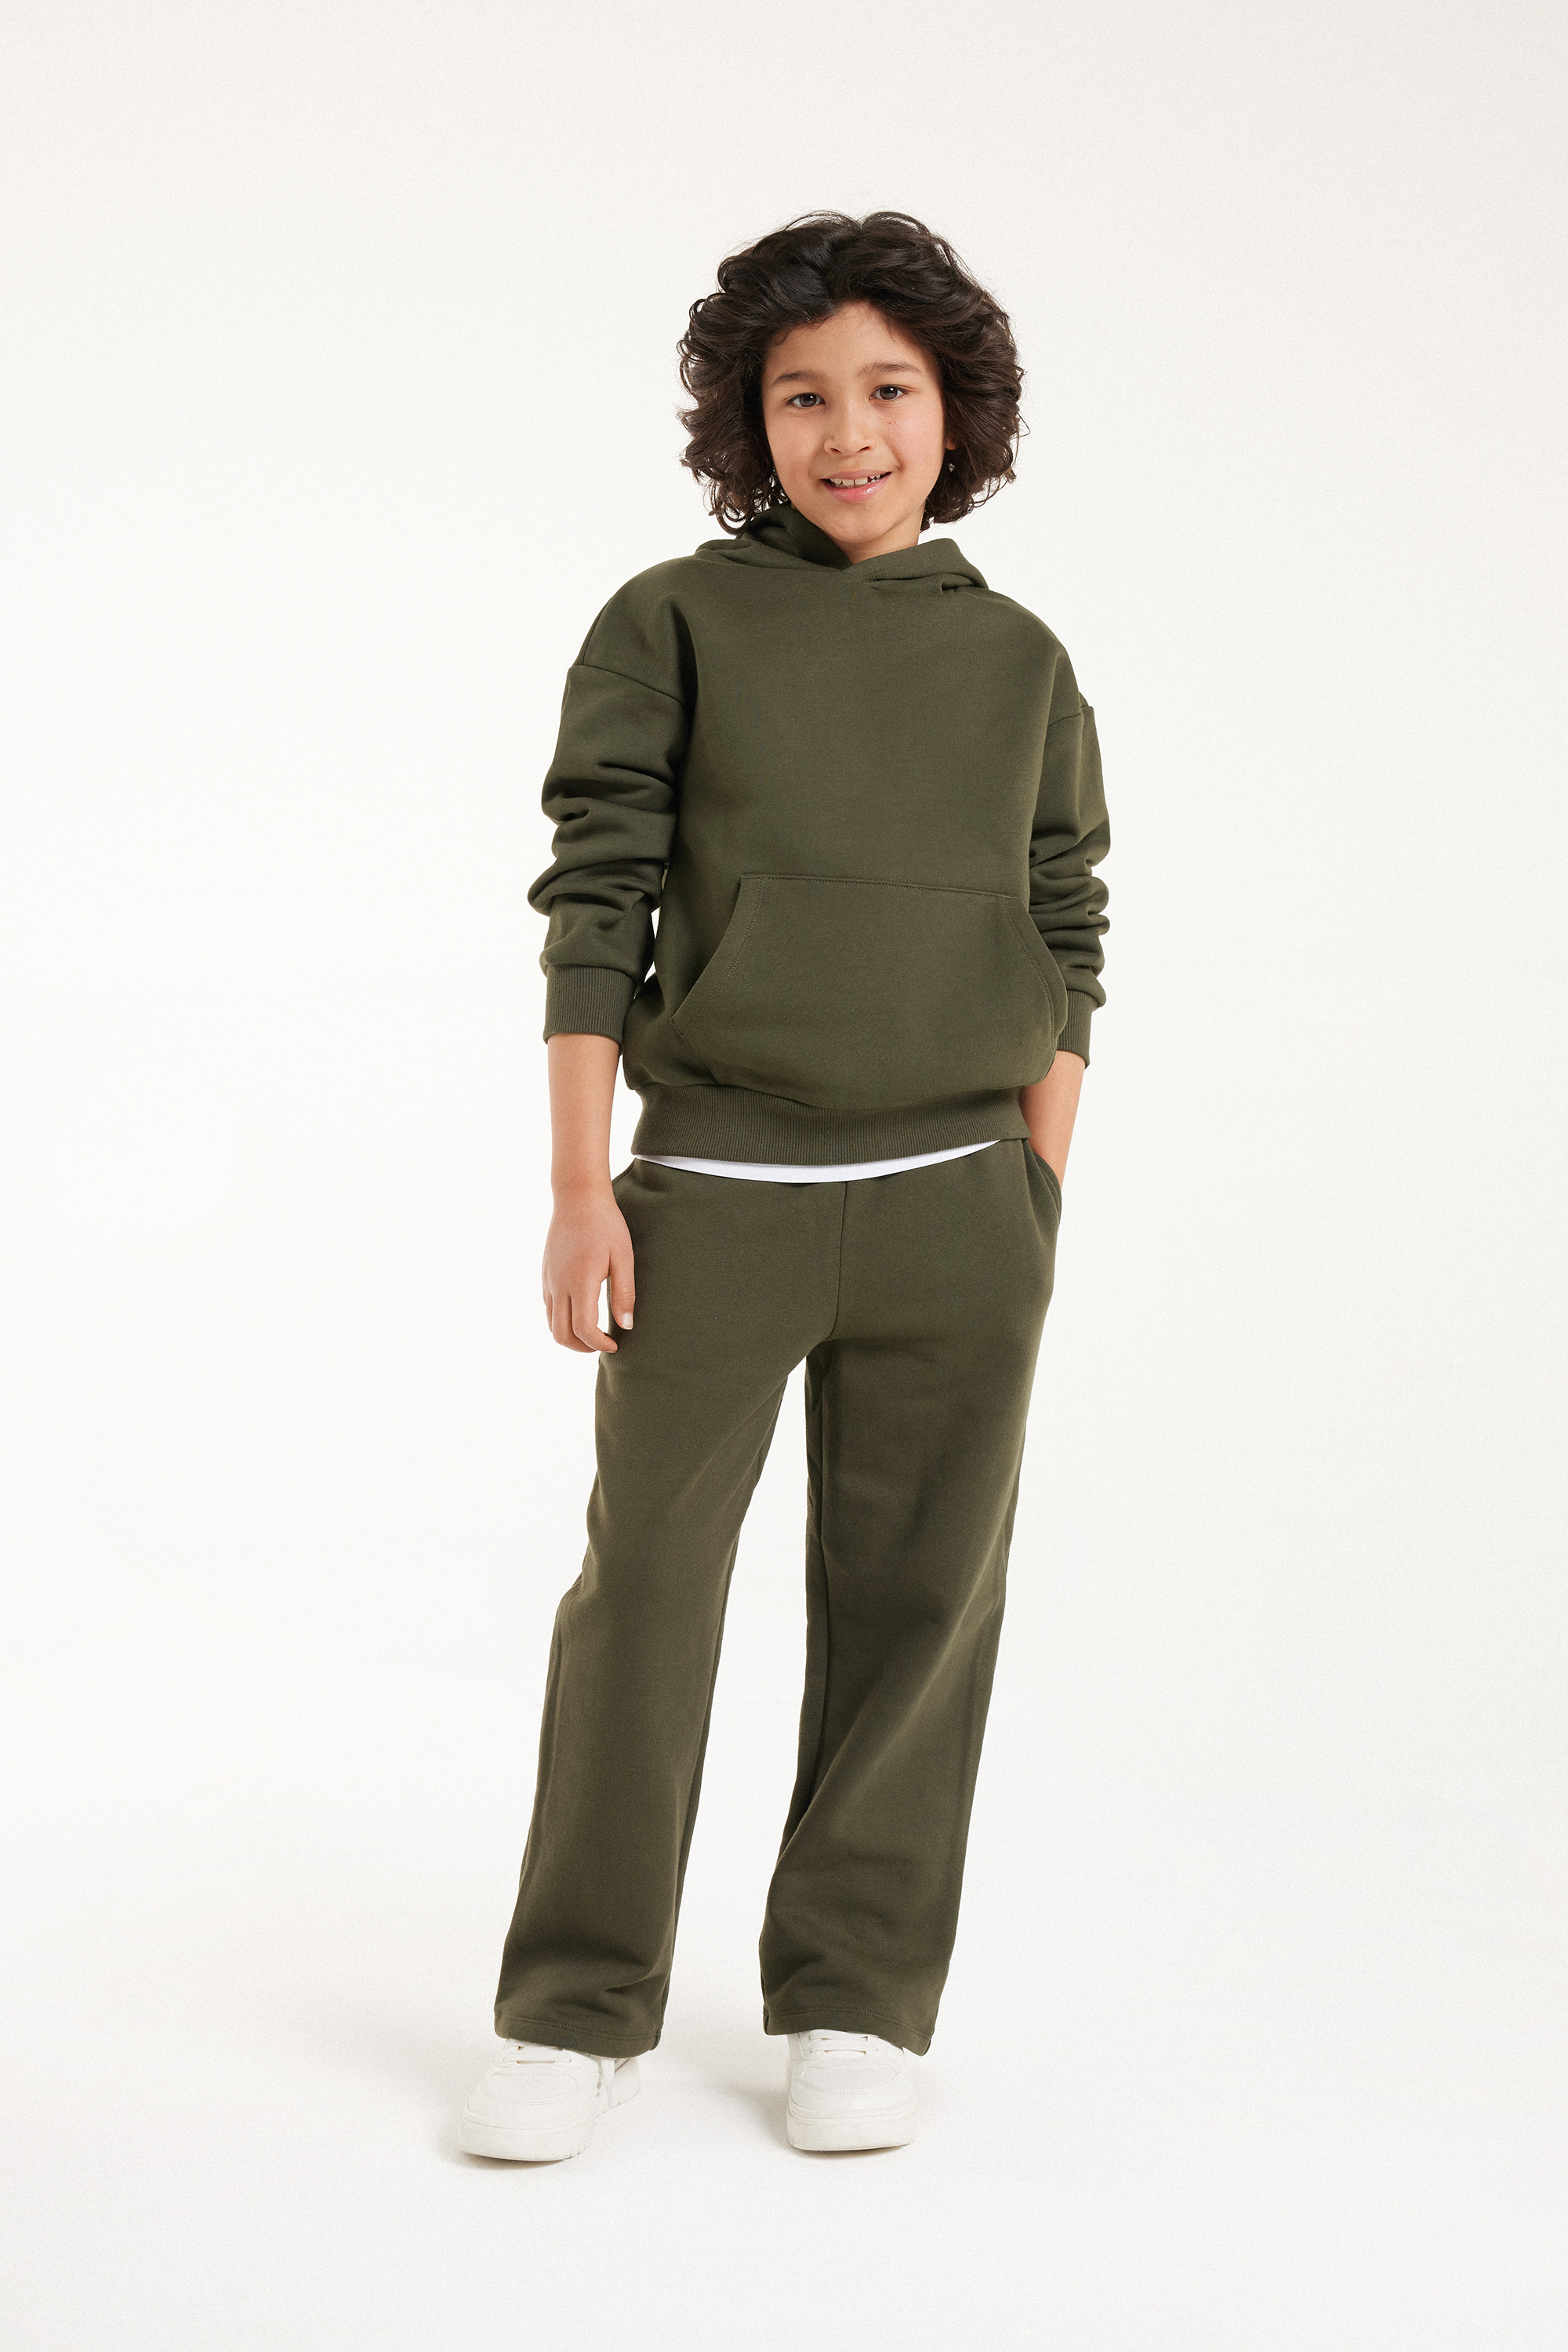 Boys’ Thick Fleece Trousers